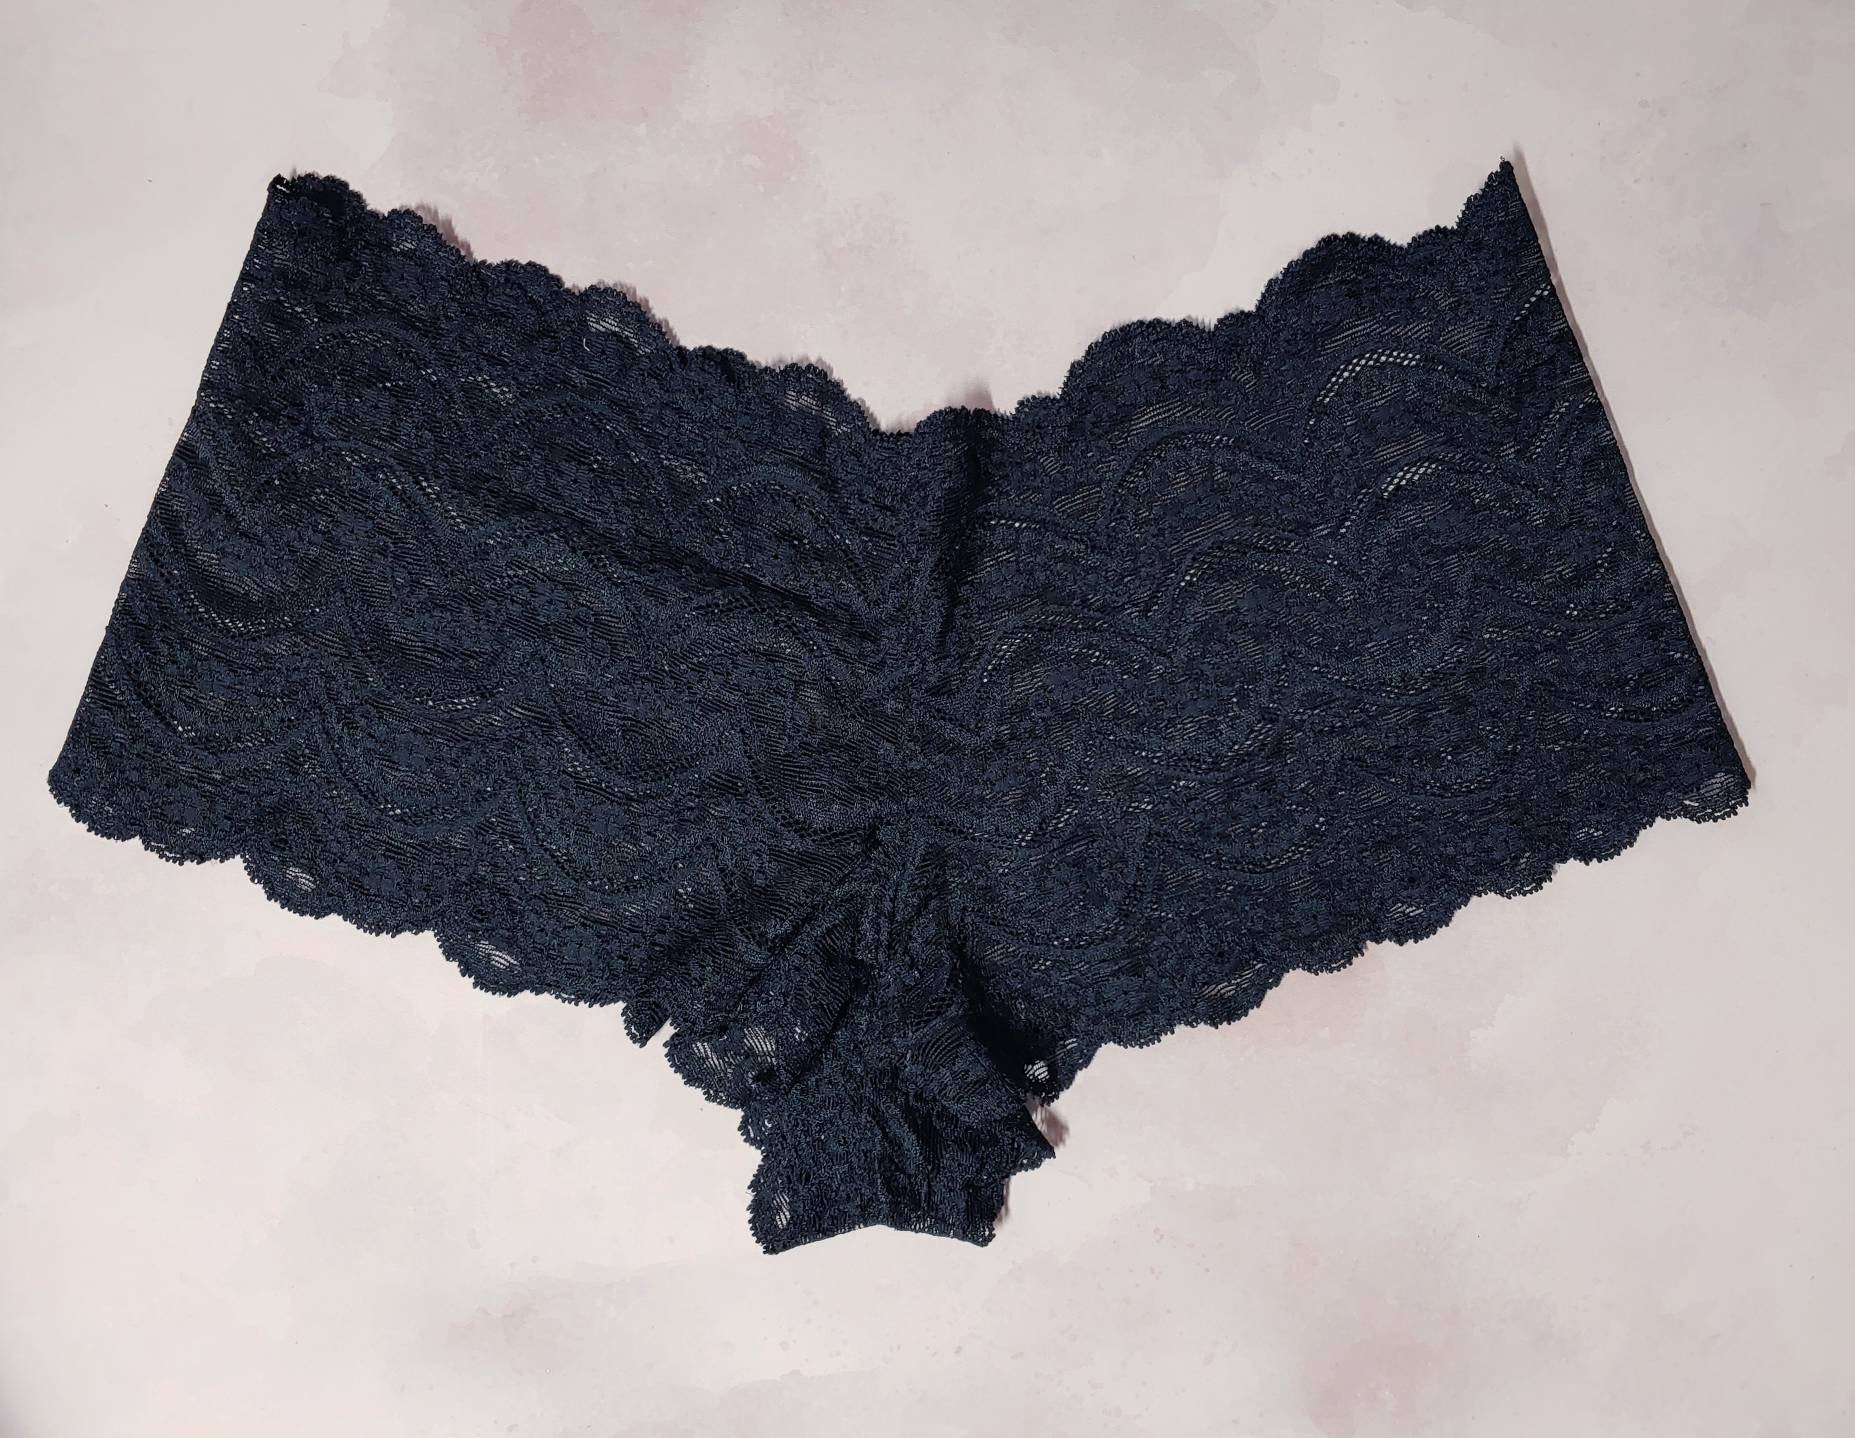 Boyshort Panties in Black Stretch Lace, Available Crotchless All Access  Panty